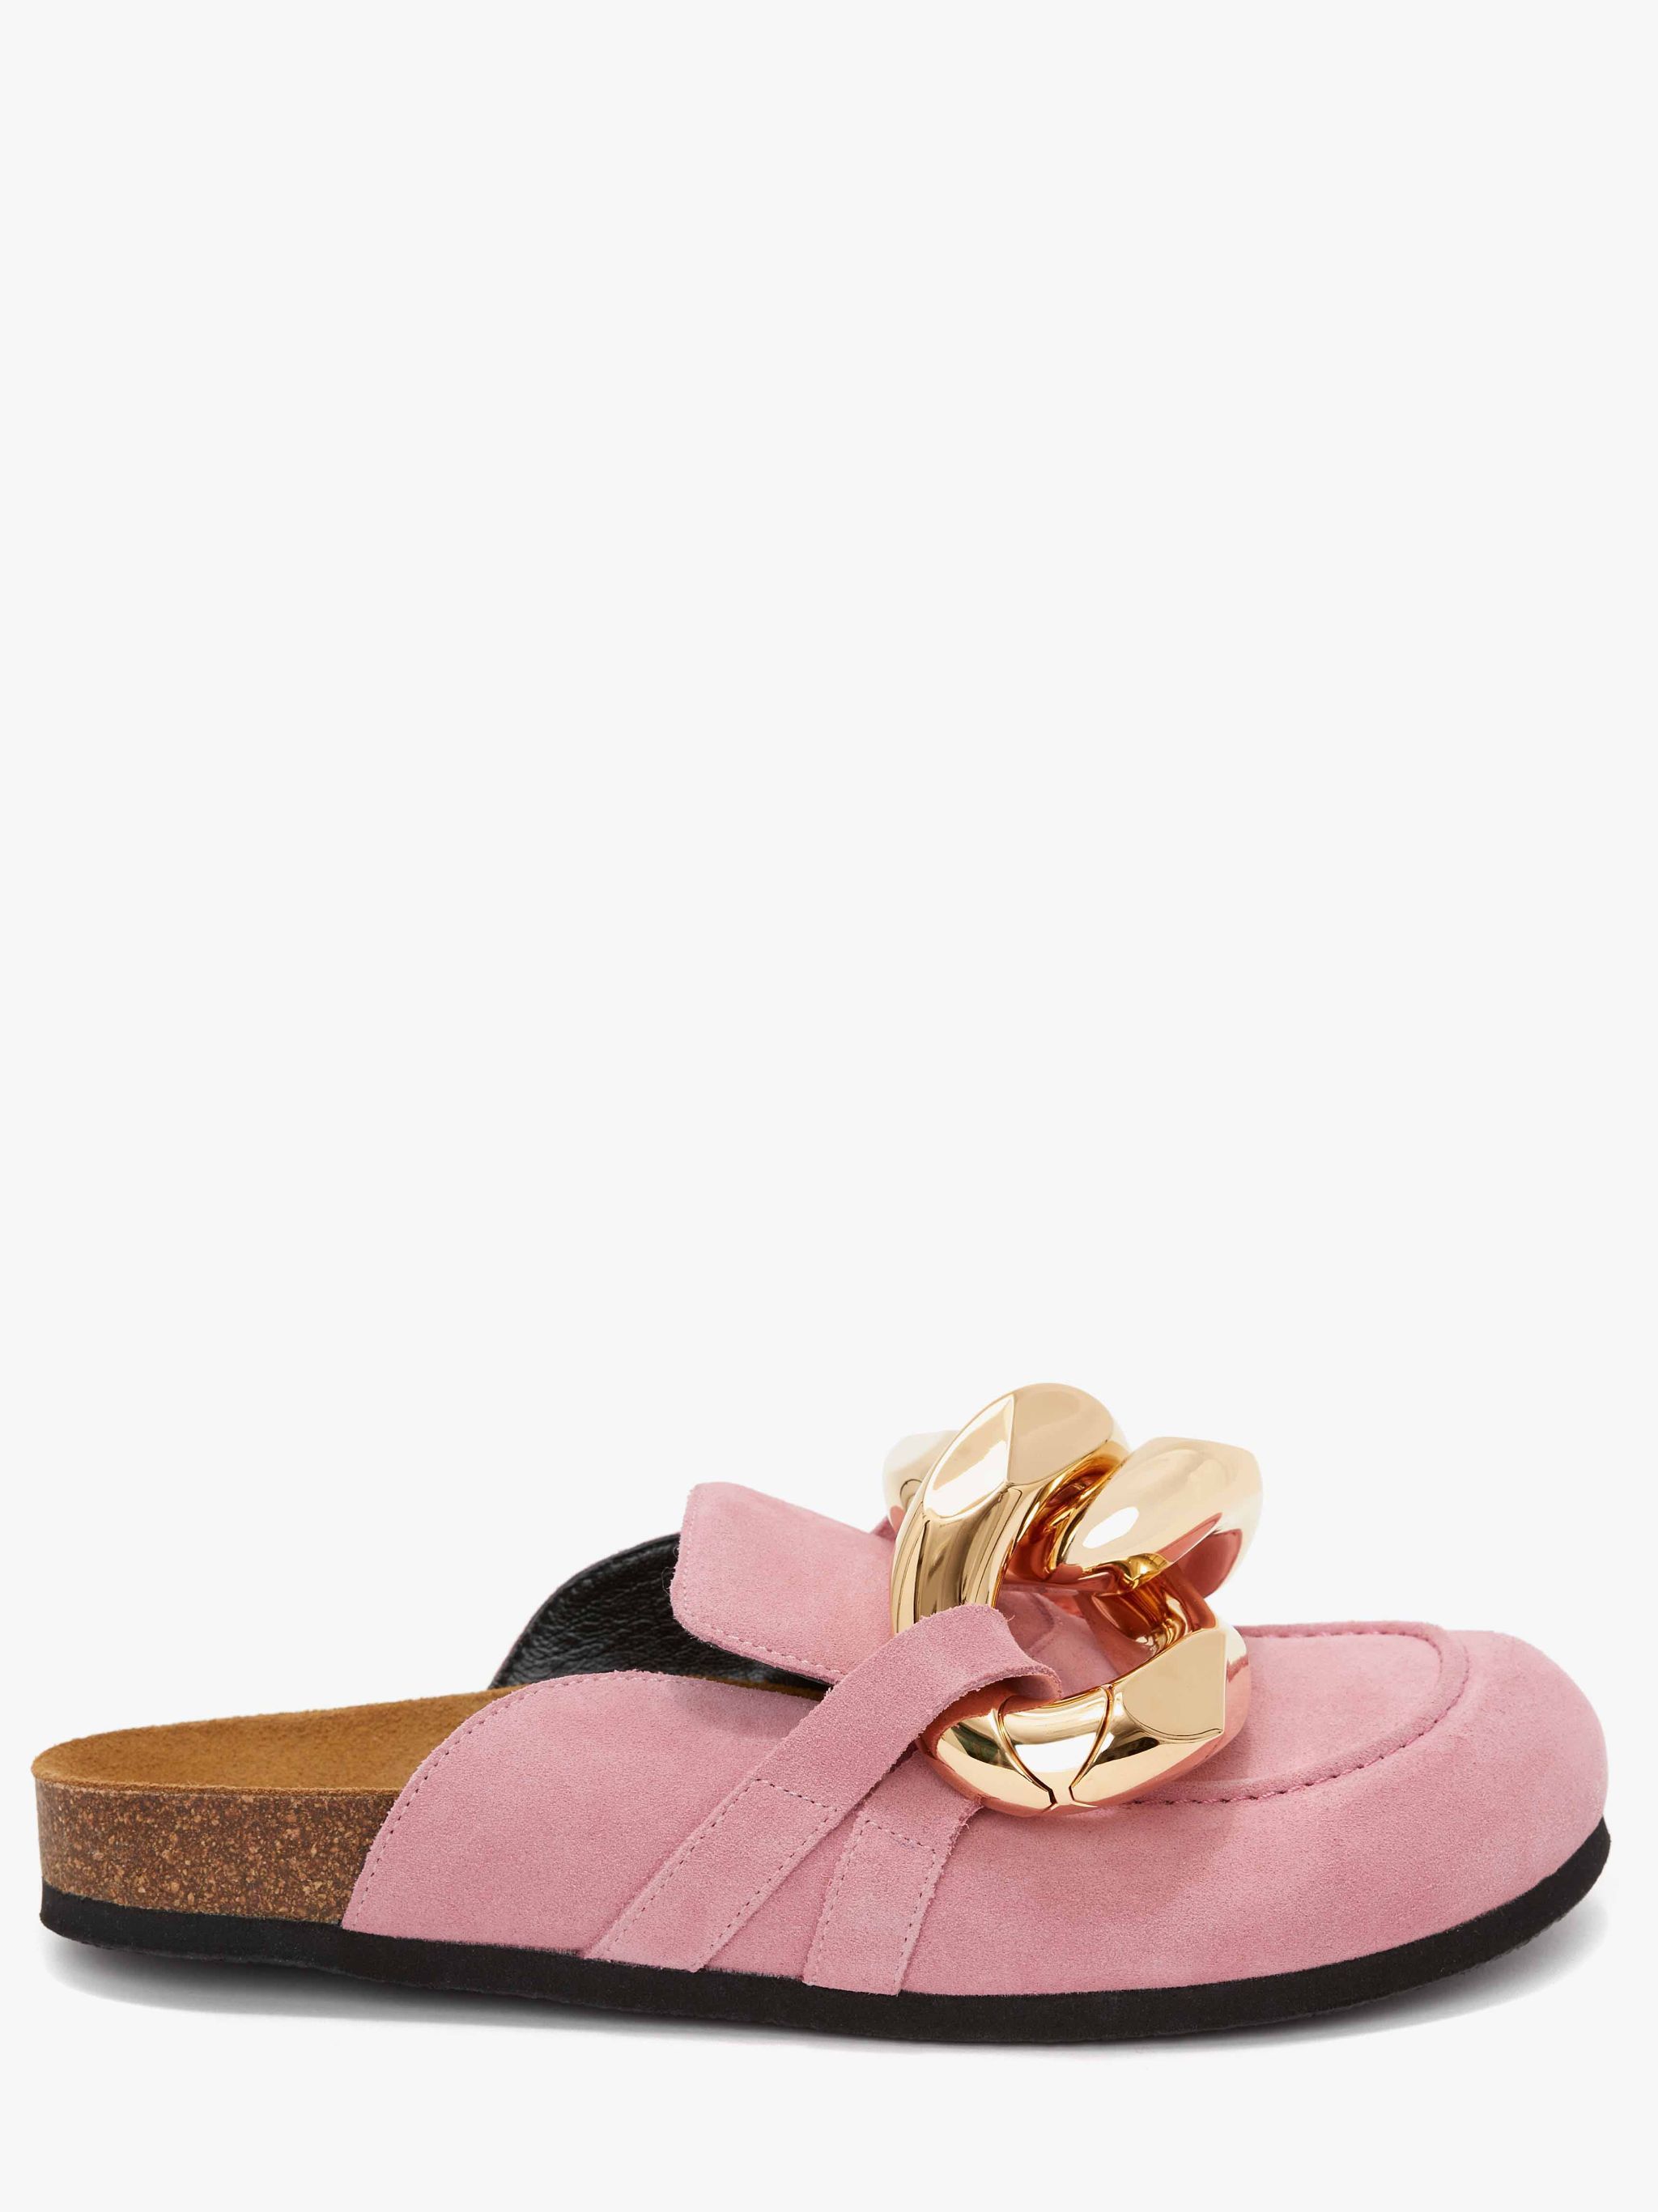 WOMEN'S CHAIN LOAFER MULES | JW Anderson